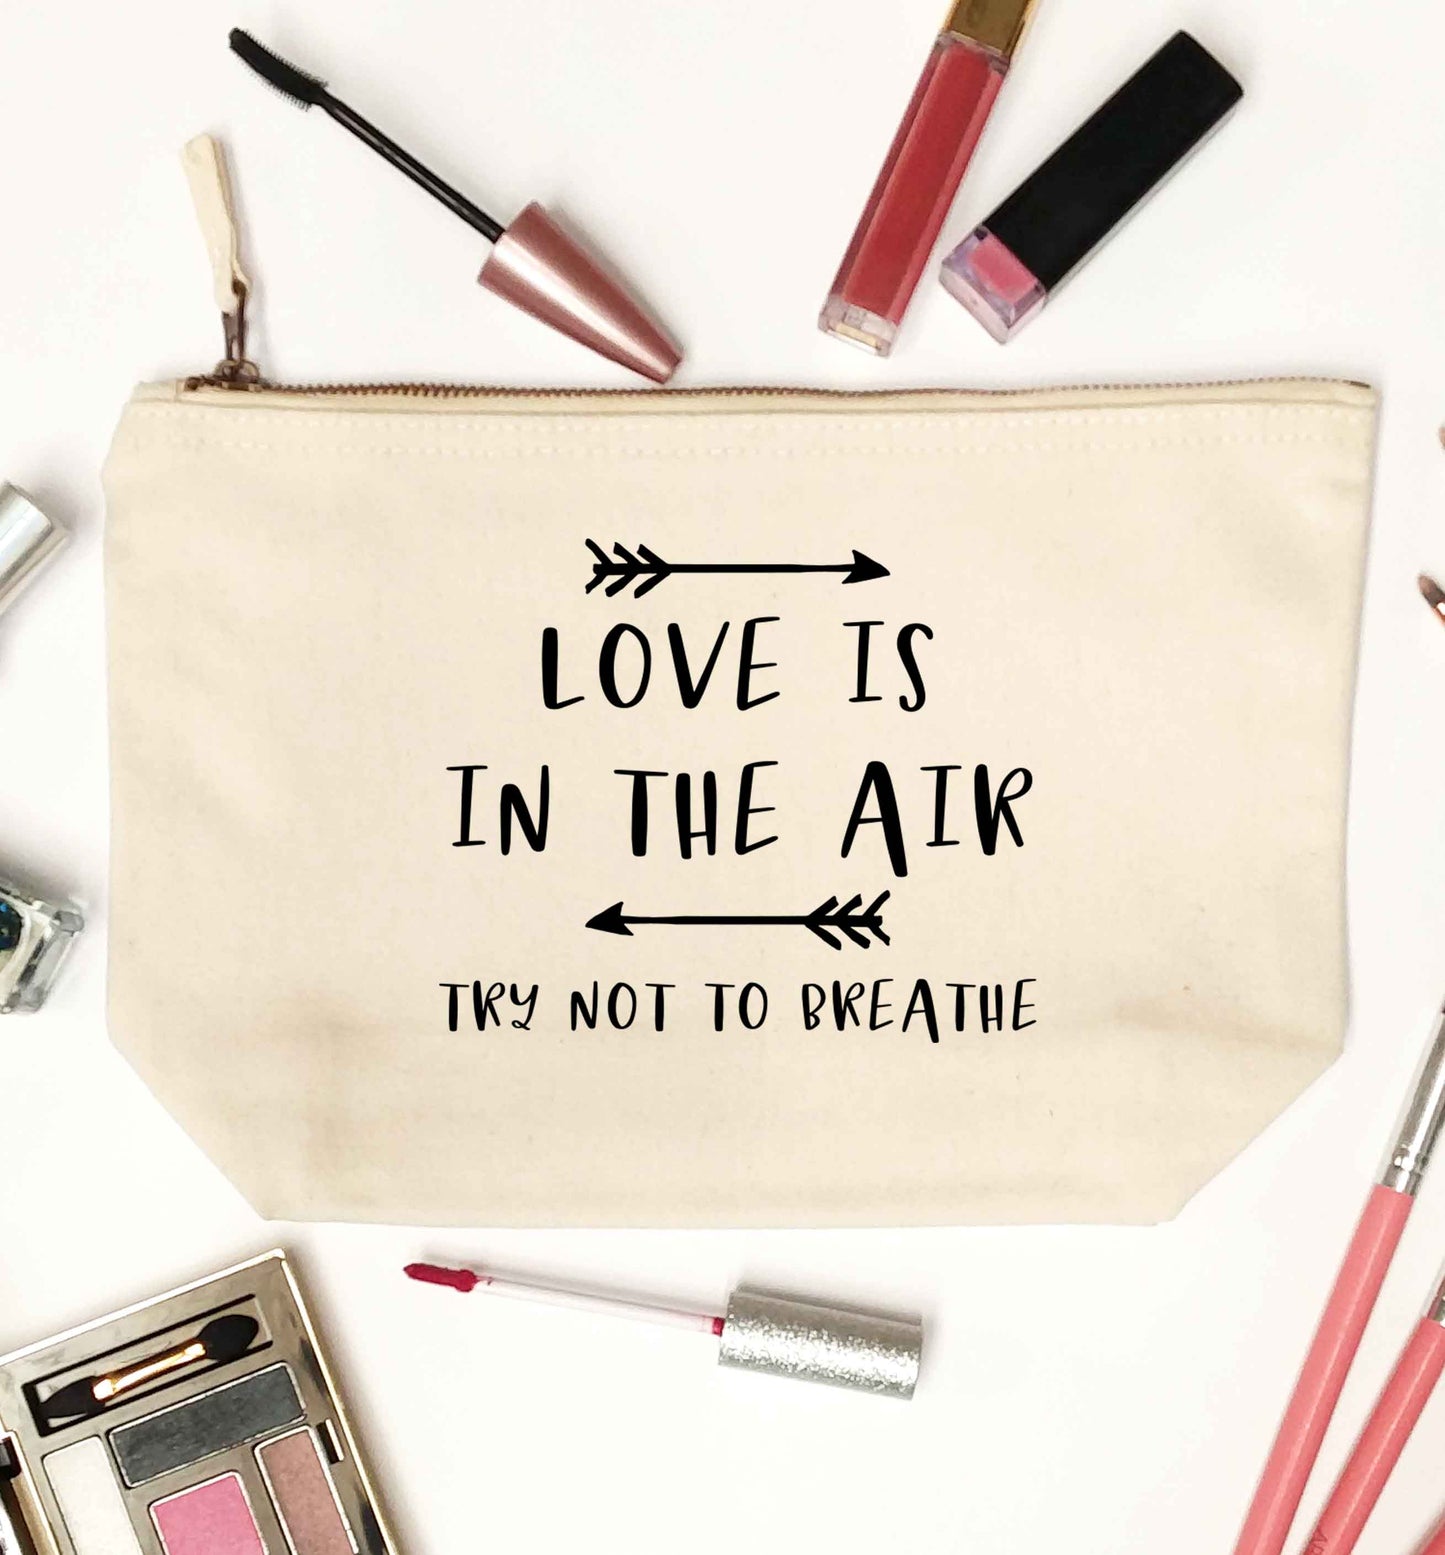 Love is in the air try not to breathe natural makeup bag